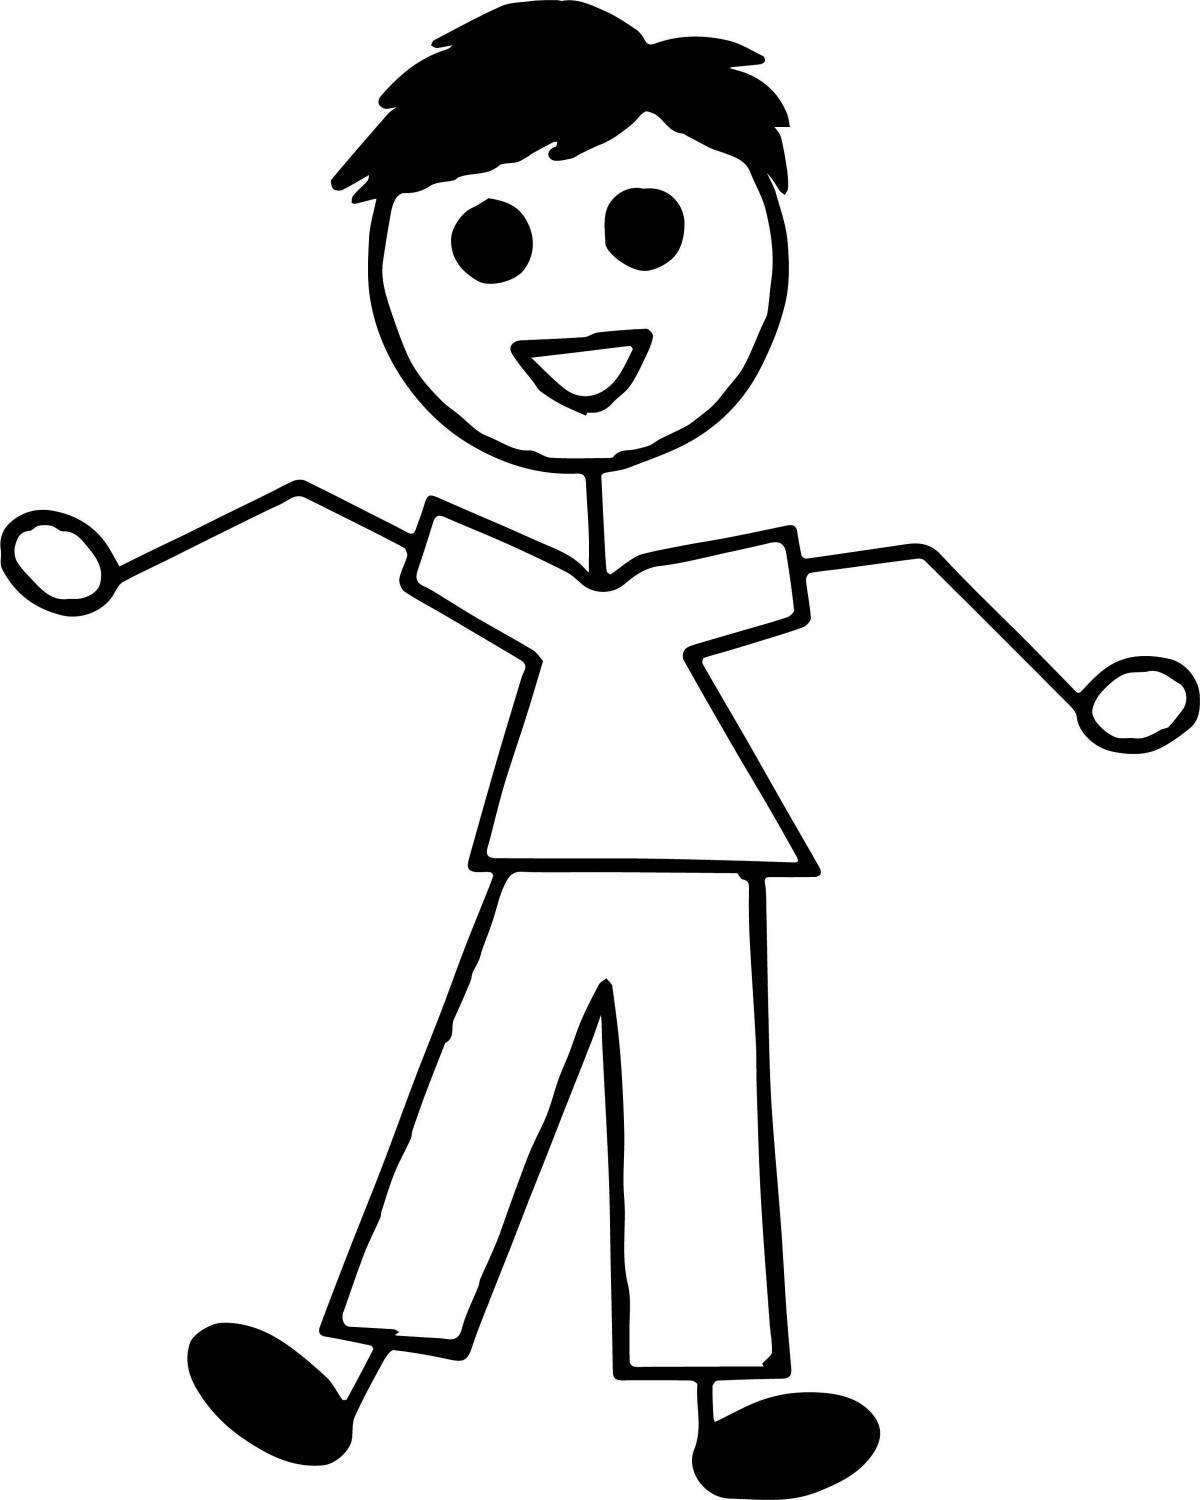 Coloring page playful henry stickman